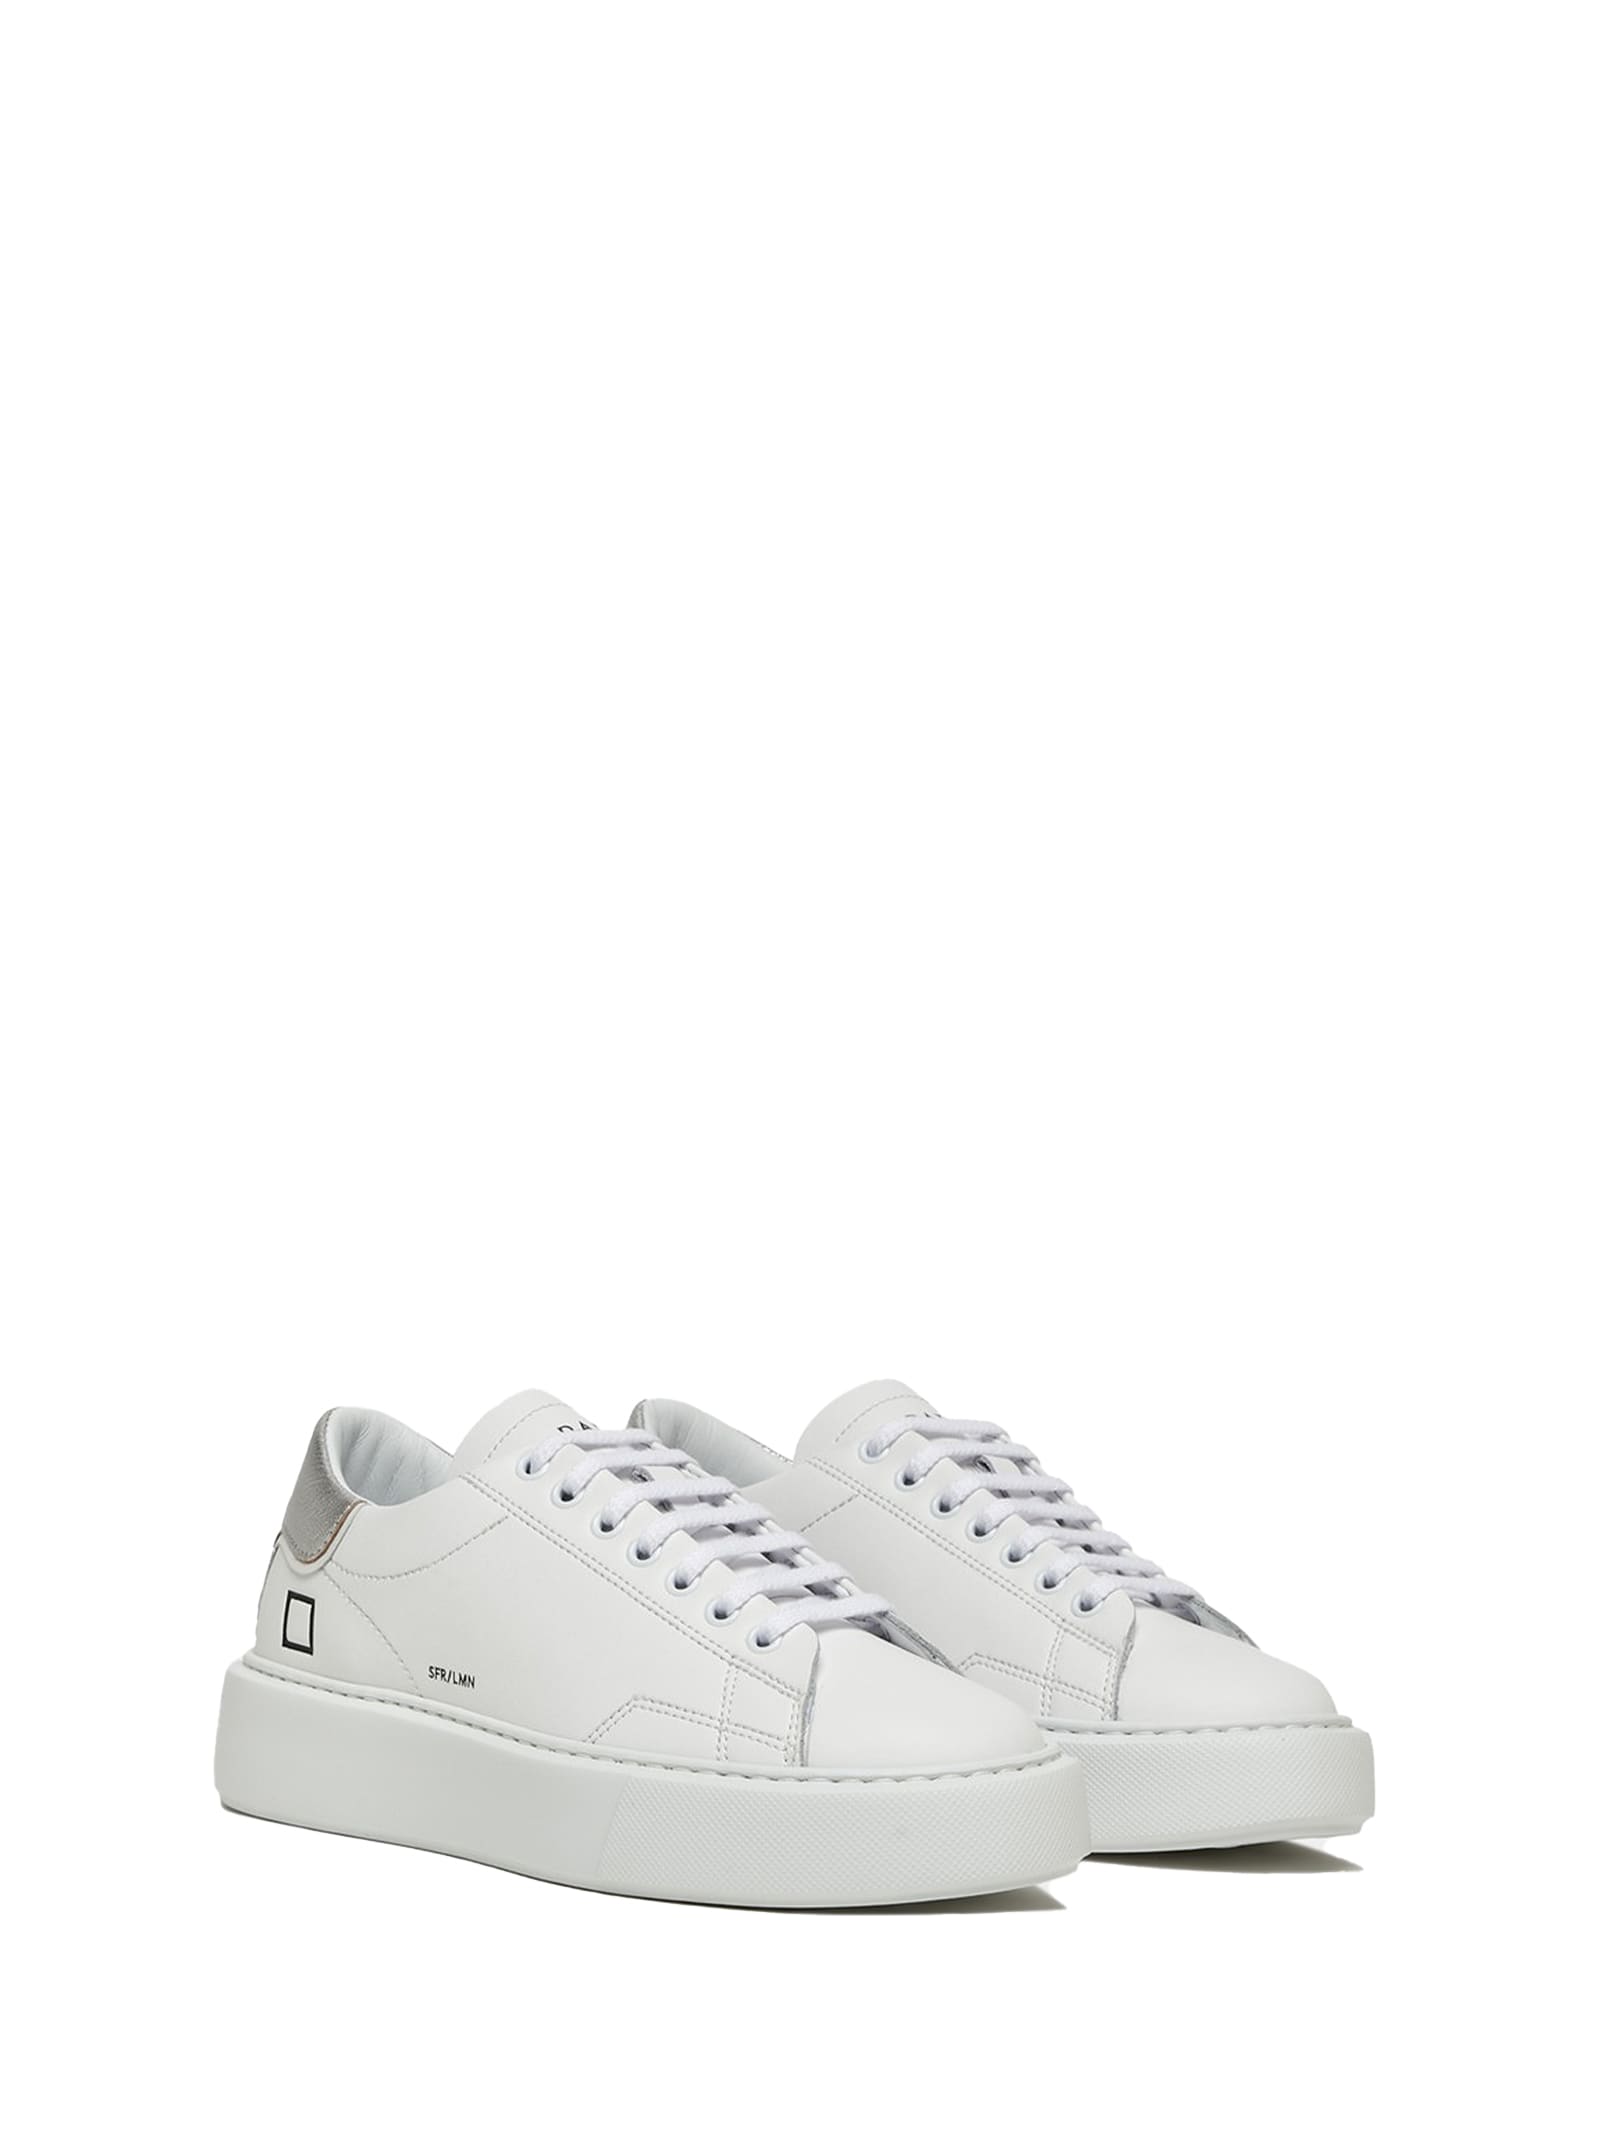 Shop Date Sfera Womens Sneaker In Leather And Silver Heel